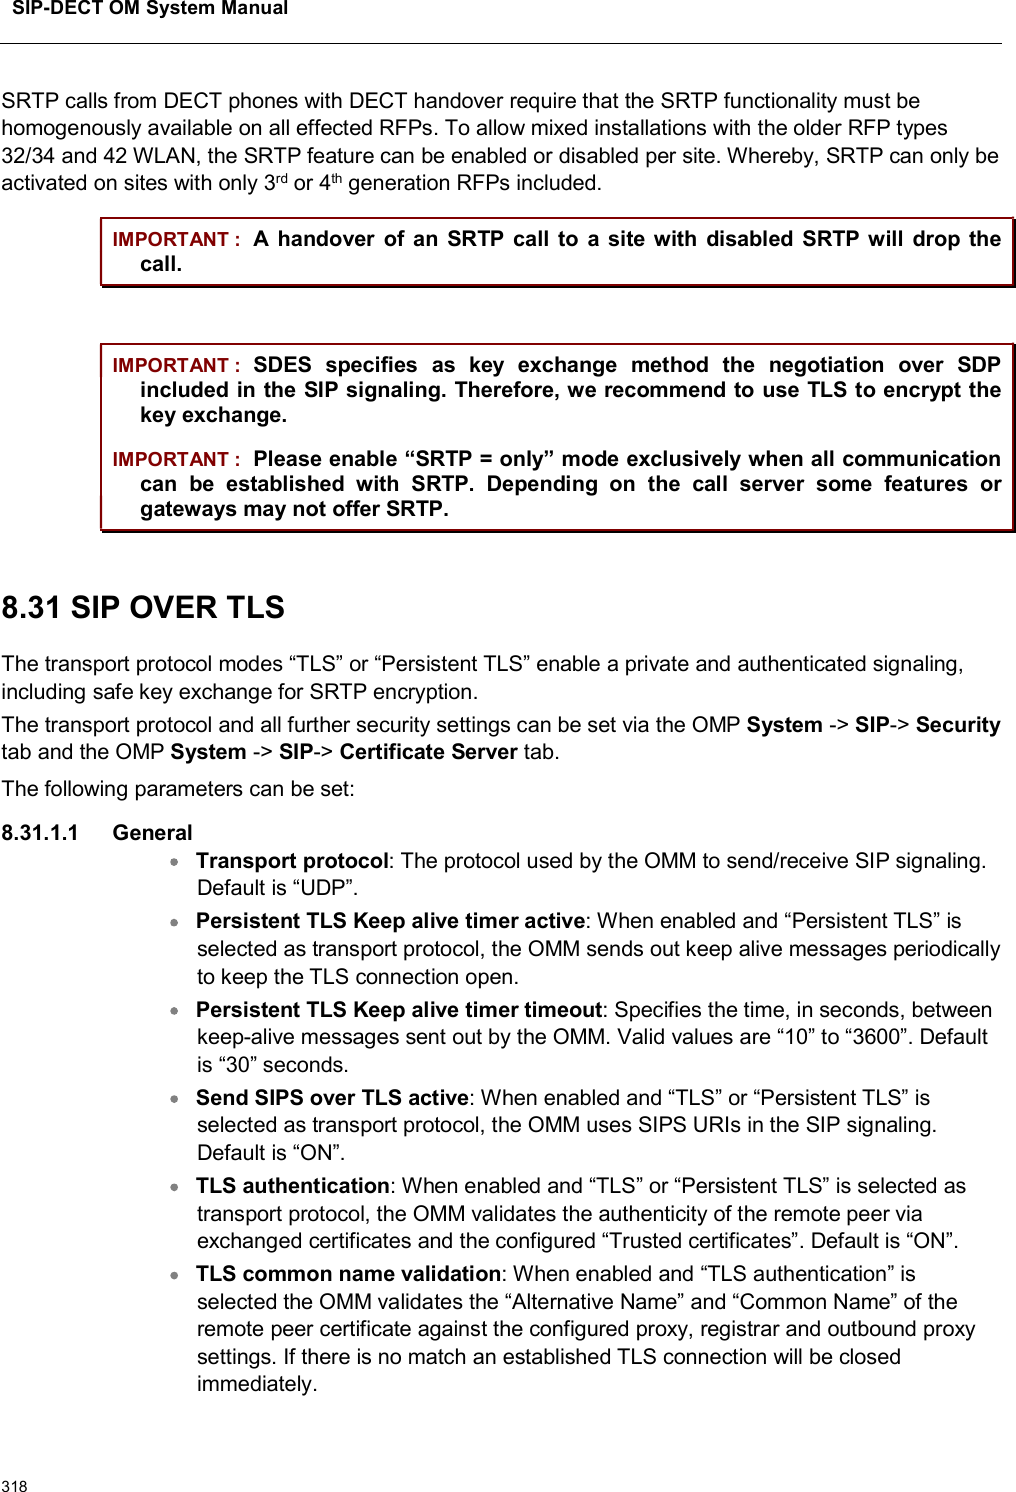 SIP-DECT OM System Manual318SRTP calls from DECT phones with DECT handover require that the SRTP functionality must be homogenously available on all effected RFPs. To allow mixed installations with the older RFP types 32/34 and 42 WLAN, the SRTP feature can be enabled or disabled per site. Whereby, SRTP can only be activated on sites with only 3rd or 4th generation RFPs included.IMPORTANT : A handover of an  SRTP call to  a site with disabled SRTP will  drop  the call.IMPORTANT : SDES  specifies  as  key  exchange  method  the  negotiation  over  SDP included in the SIP signaling. Therefore, we recommend to use TLS to encrypt the key exchange.IMPORTANT : Please enable “SRTP = only” mode exclusively when all communication can  be  established  with  SRTP.  Depending  on  the  call  server  some  features  or gateways may not offer SRTP.8.31 SIP OVER TLS The transport protocol modes “TLS” or “Persistent TLS” enable a private and authenticated signaling, including safe key exchange for SRTP encryption.The transport protocol and all further security settings can be set via the OMP System -&gt; SIP-&gt; Securitytab and the OMP System -&gt; SIP-&gt; Certificate Server tab.The following parameters can be set: 8.31.1.1 GeneralTransport protocol: The protocol used by the OMM to send/receive SIP signaling. Default is “UDP”.Persistent TLS Keep alive timer active: When enabled and “Persistent TLS” is selected as transport protocol, the OMM sends out keep alive messages periodically to keep the TLS connection open.Persistent TLS Keep alive timer timeout: Specifies the time, in seconds, between keep-alive messages sent out by the OMM. Valid values are “10” to “3600”. Default is “30” seconds.Send SIPS over TLS active: When enabled and “TLS” or “Persistent TLS” is selected as transport protocol, the OMM uses SIPS URIs in the SIP signaling.Default is “ON”. TLS authentication: When enabled and “TLS” or “Persistent TLS” is selected as transport protocol, the OMM validates the authenticity of the remote peer via exchanged certificates and the configured “Trusted certificates”. Default is “ON”.TLS common name validation: When enabled and “TLS authentication” is selected the OMM validates the “Alternative Name” and “Common Name” of the remote peer certificate against the configured proxy, registrar and outbound proxy settings. If there is no match an established TLS connection will be closed immediately.